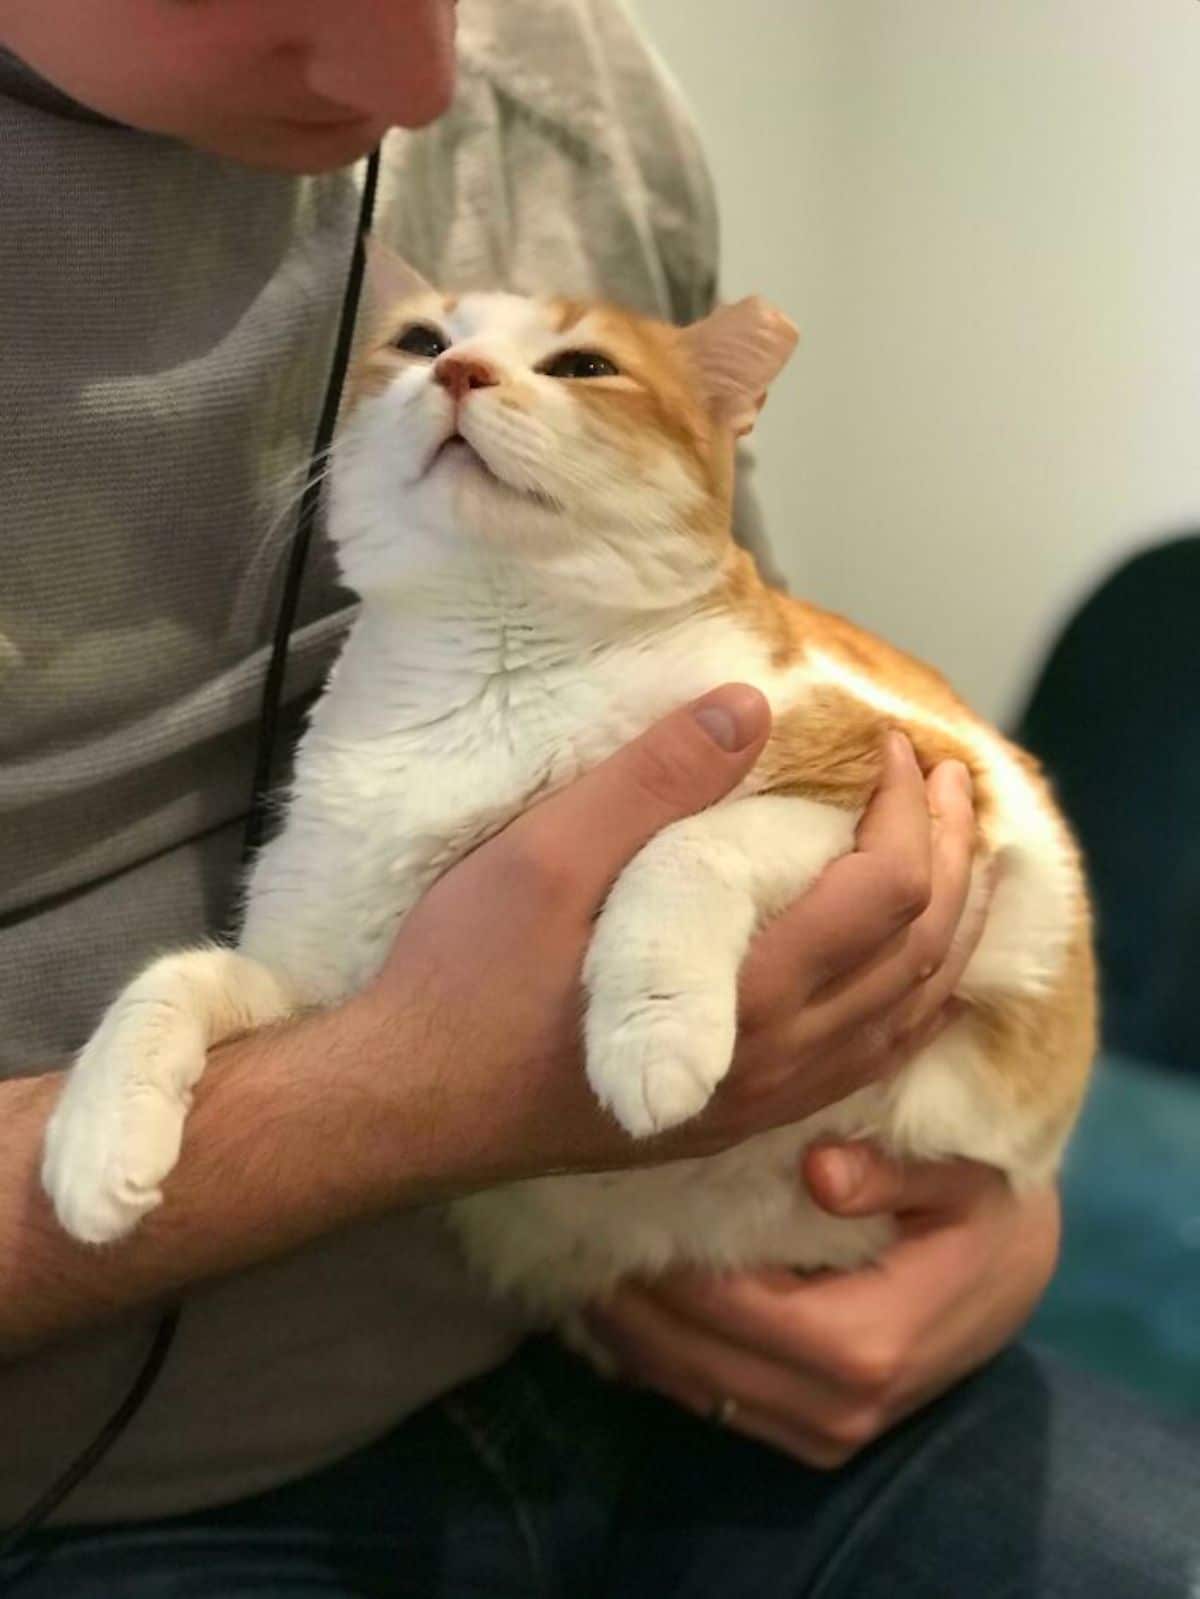 orange and white cat being held by someone and looking up lovingly